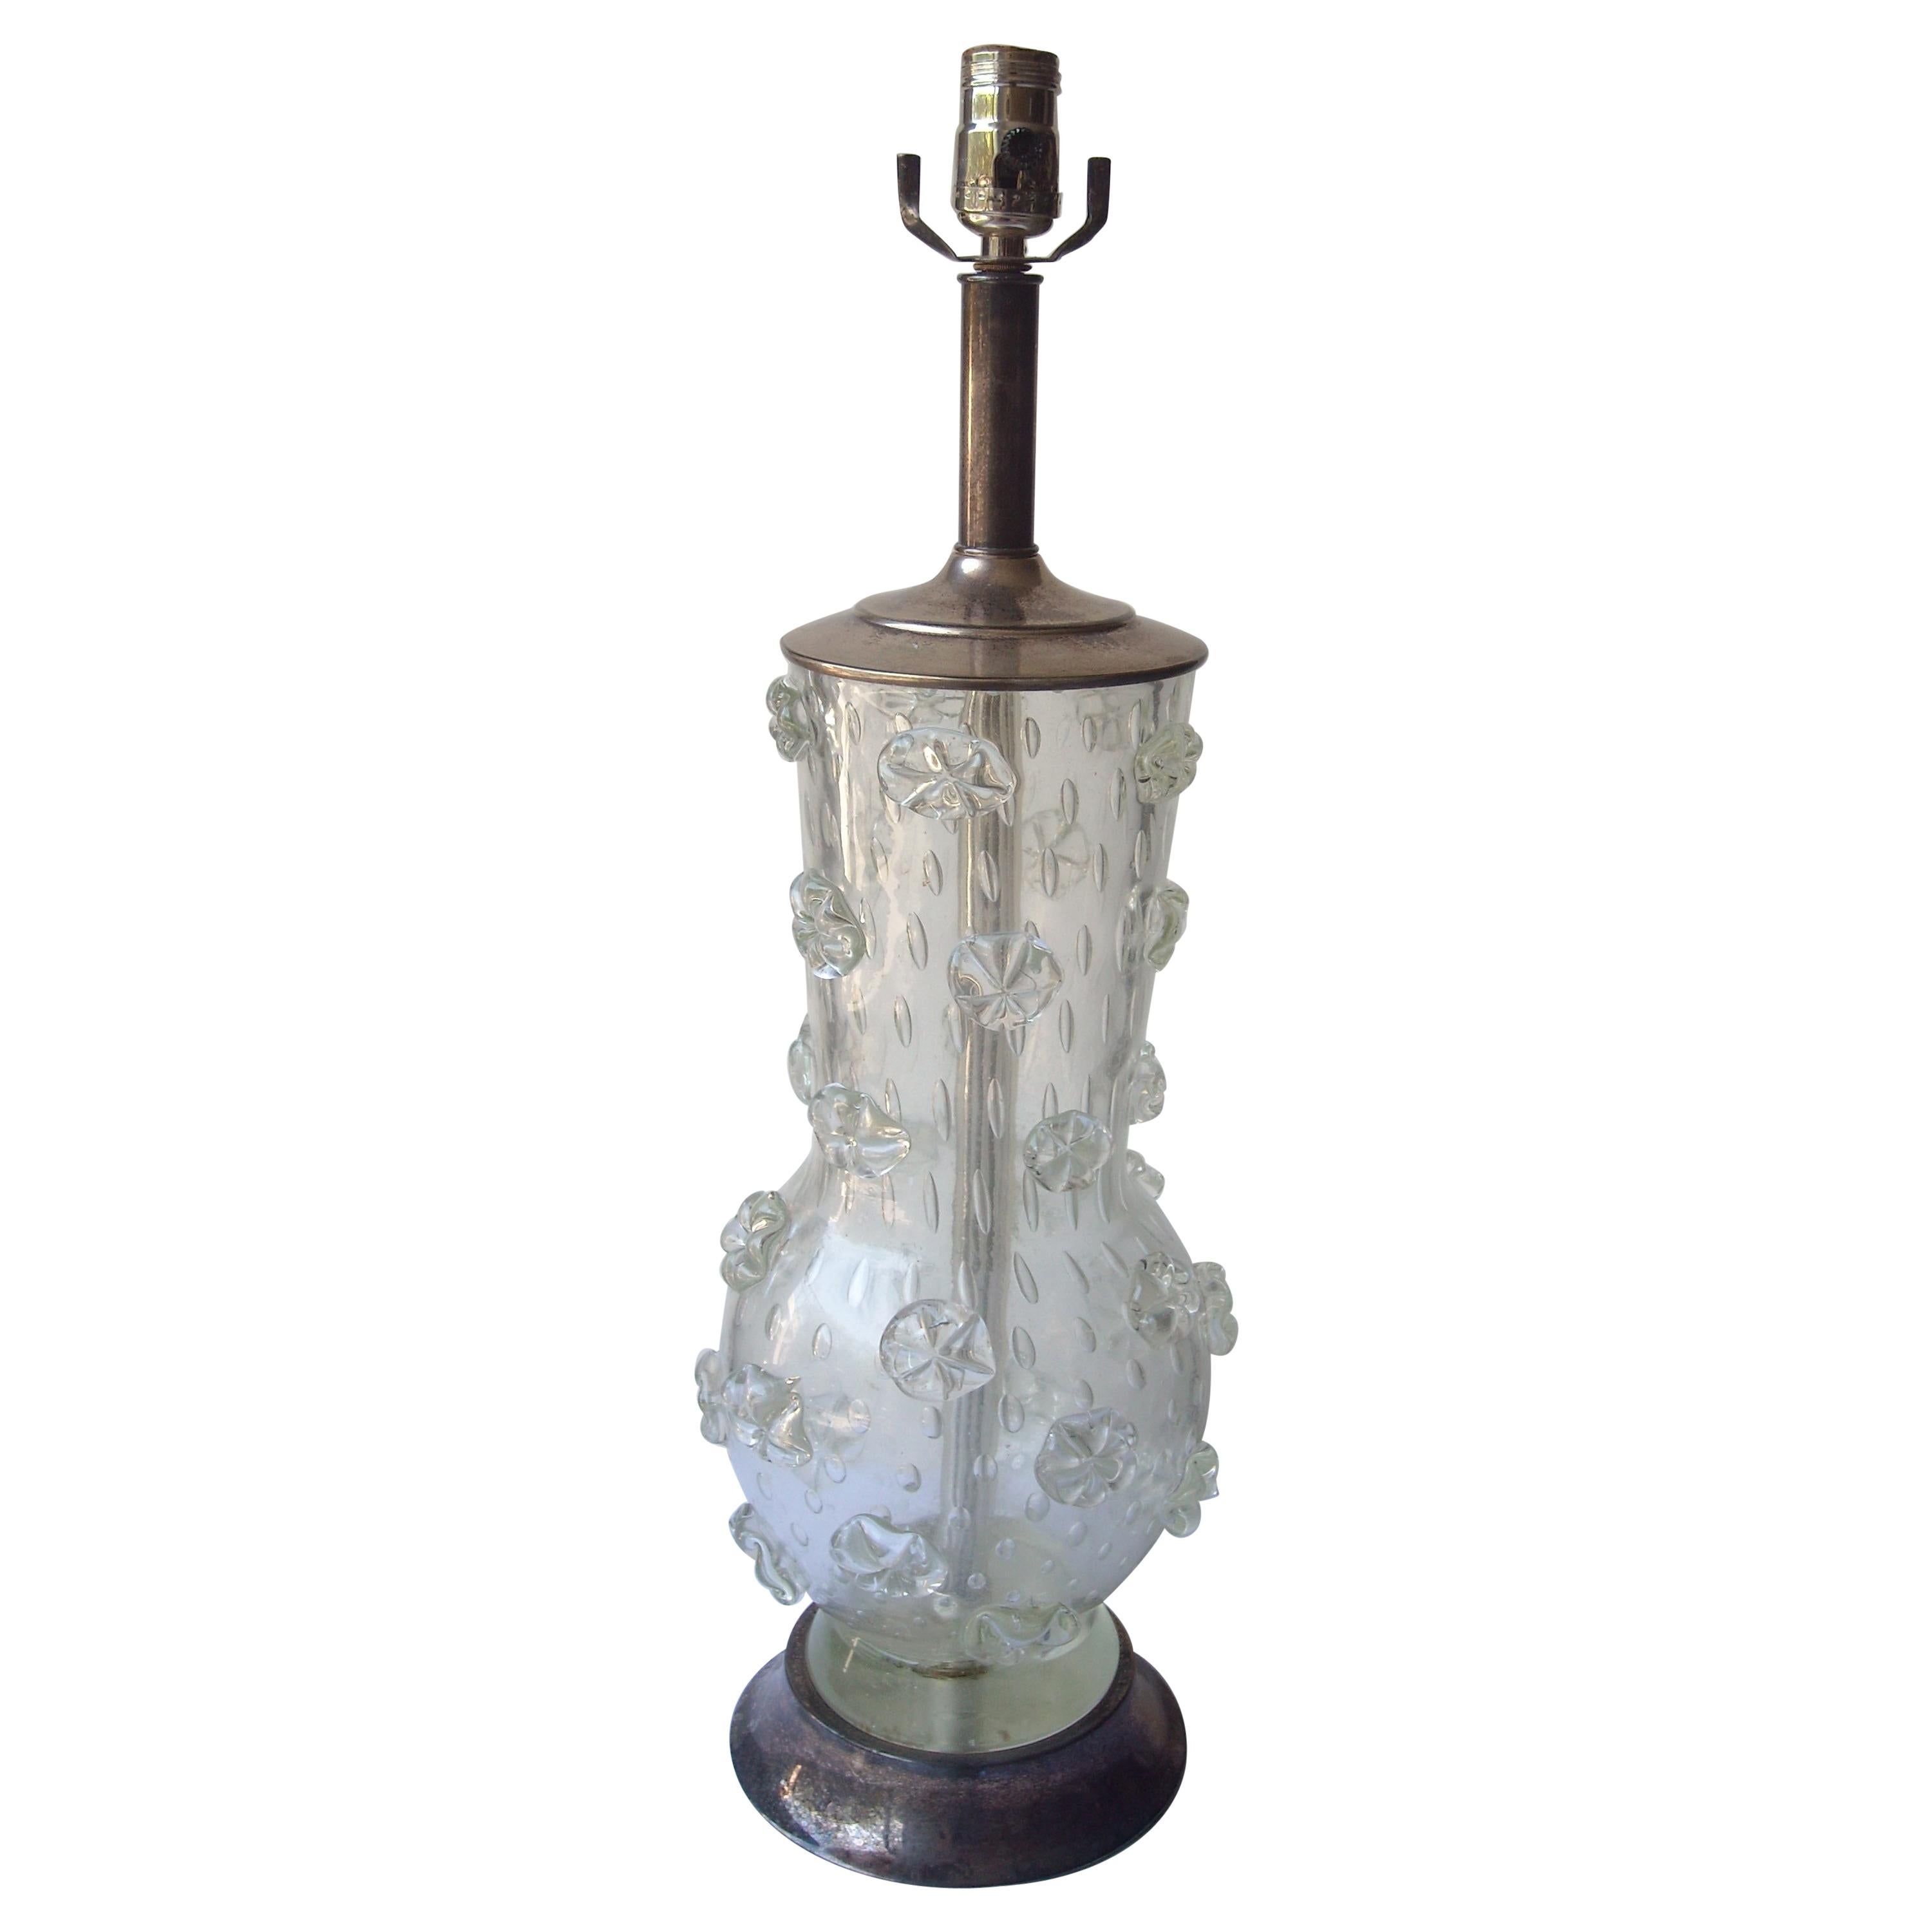 Ercole Barovier "A Stelle" Large, Rare, Murano Glass Table Lamp